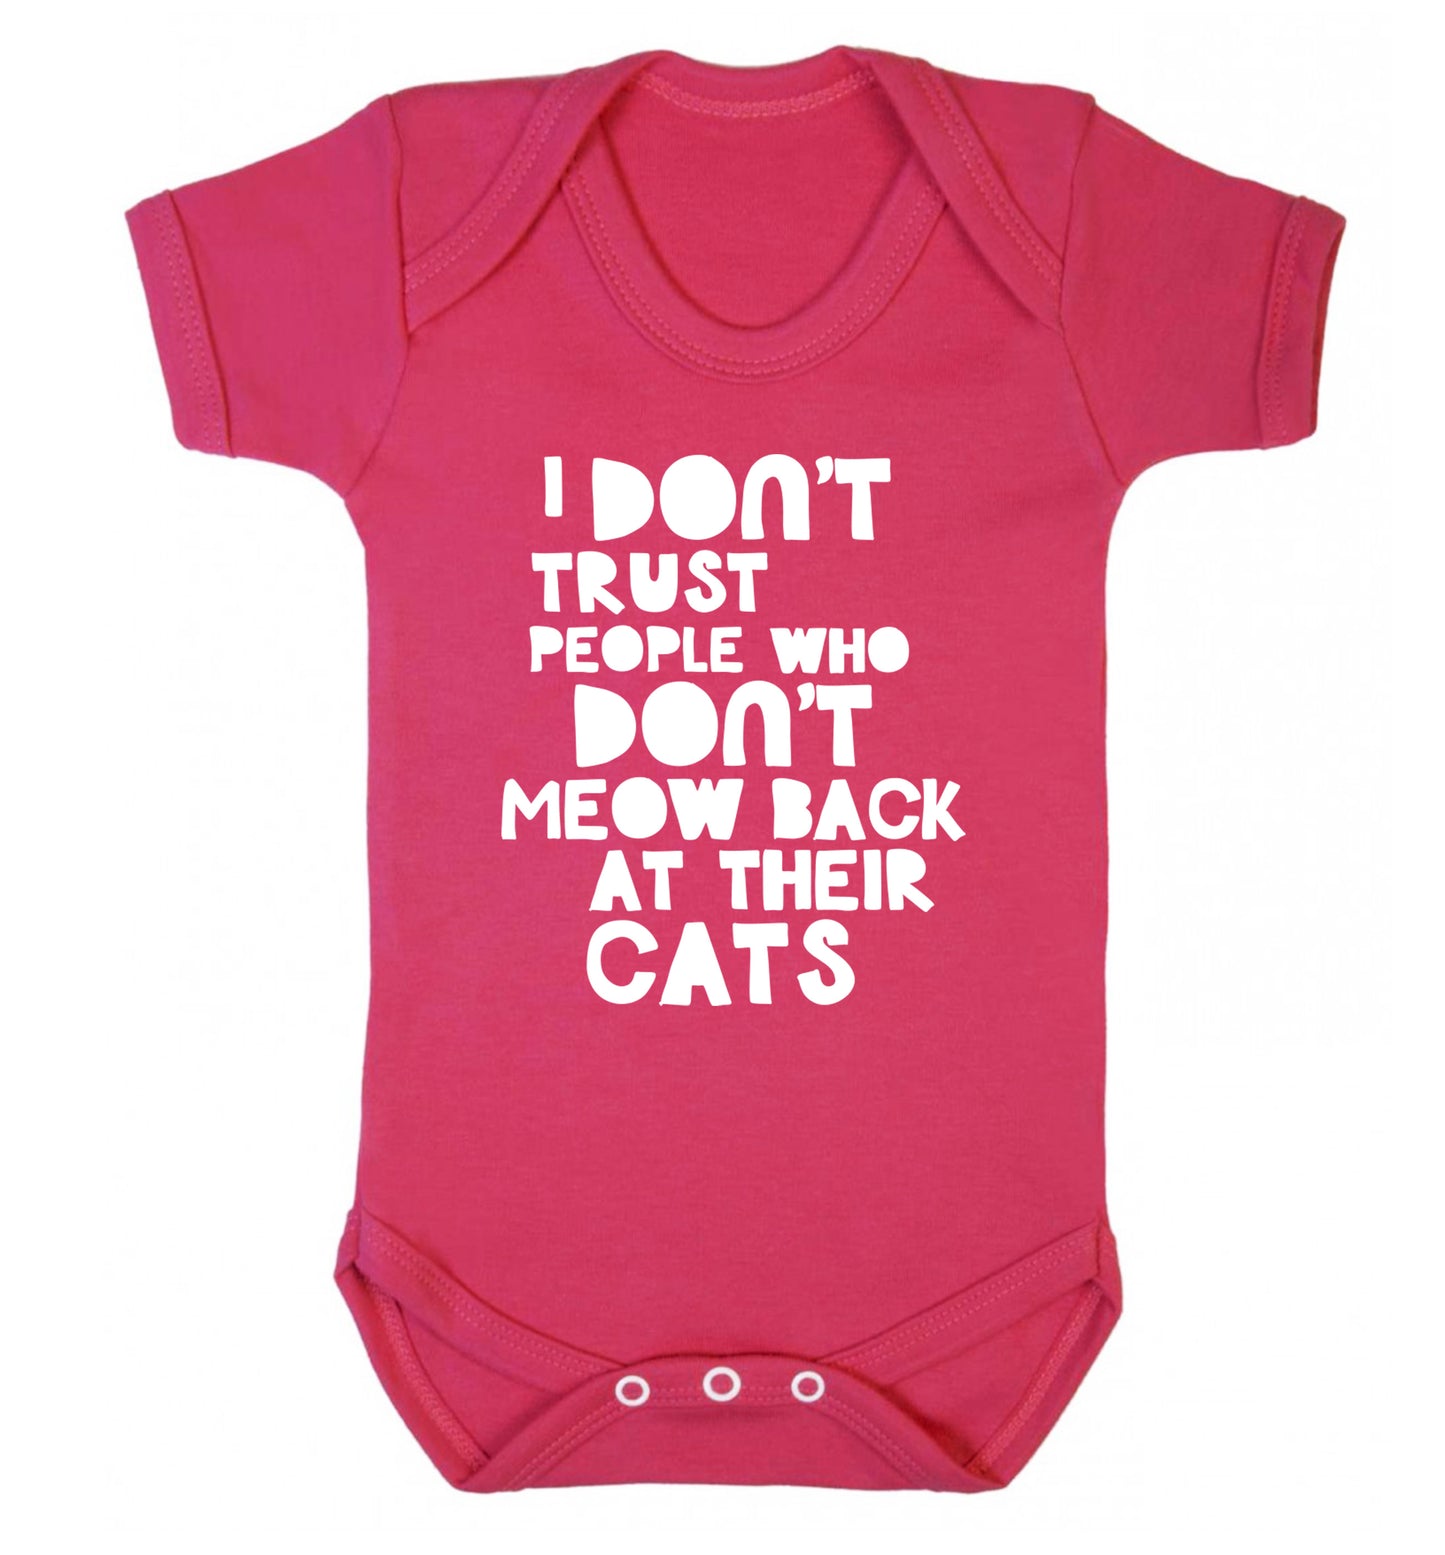 I don't trust people who don't meow back at their cats Baby Vest dark pink 18-24 months